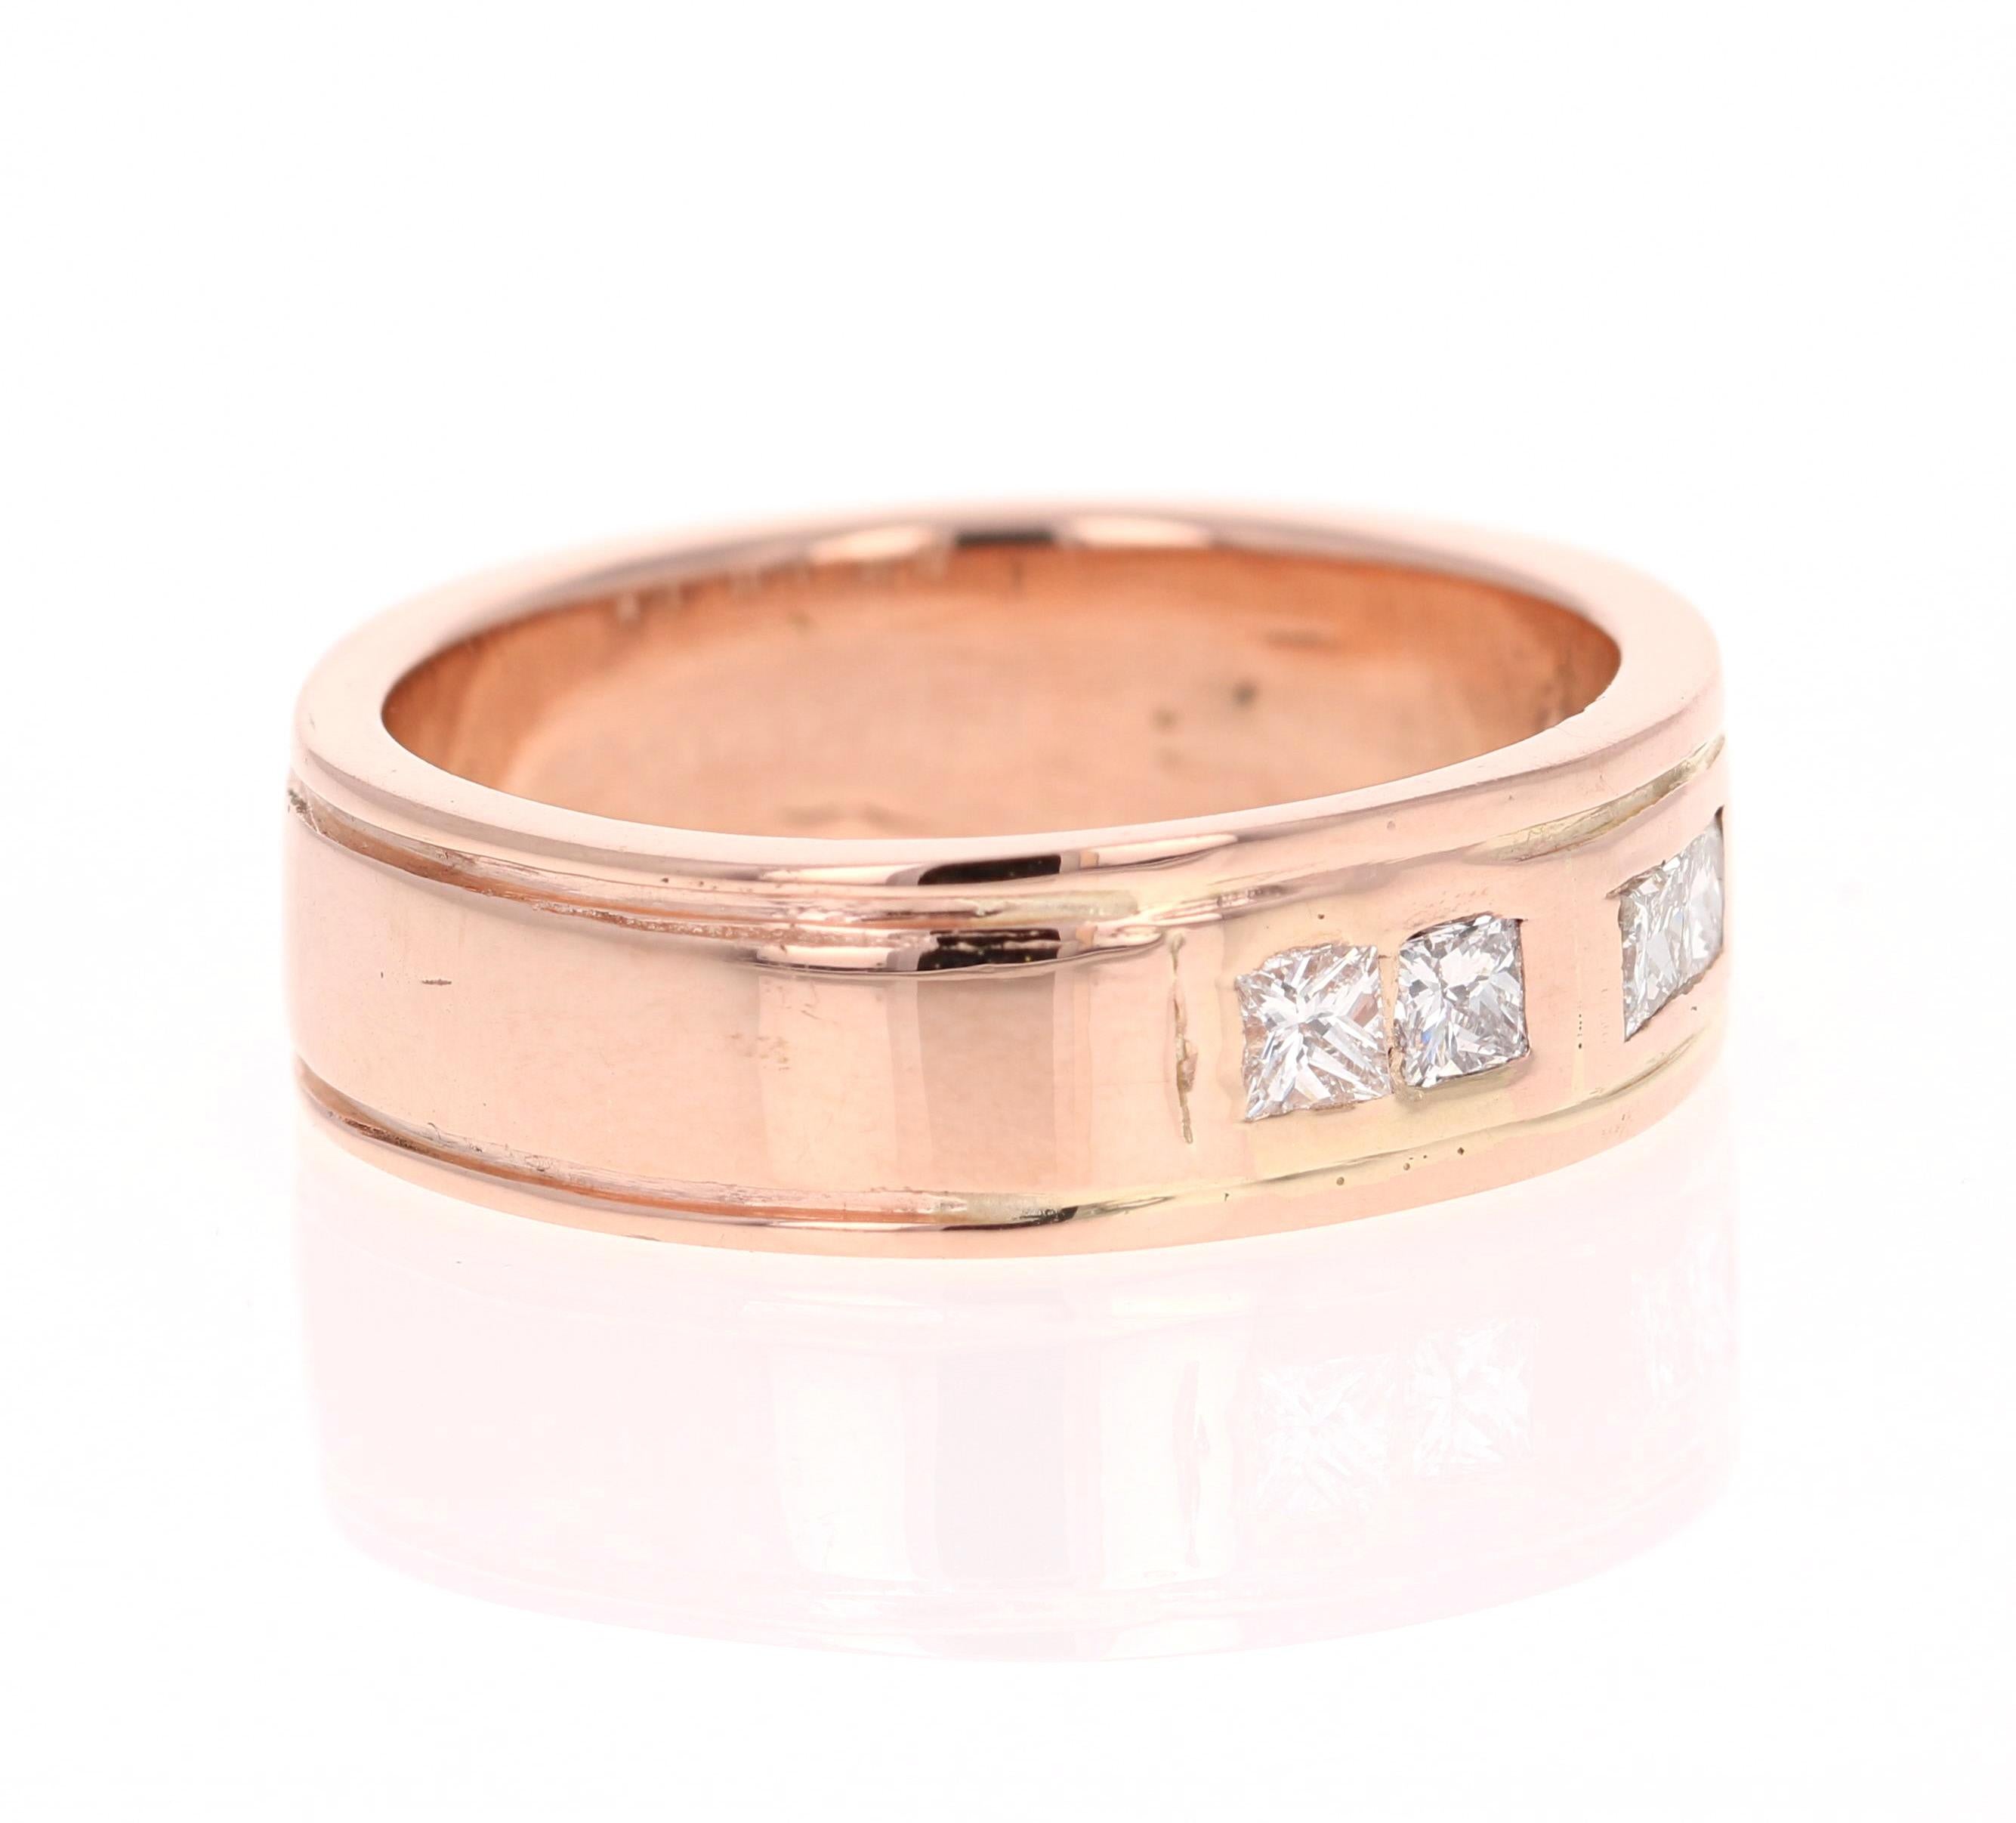 We have a Men's Fine Jewelry Collection as well! One stop shop for all your jewels! 

Calling this band unique is simply an understatement!

This ring is a magnificent and masculine Men's Diamond Band. It has 6 Princess Cut Diamonds weighing 0.72